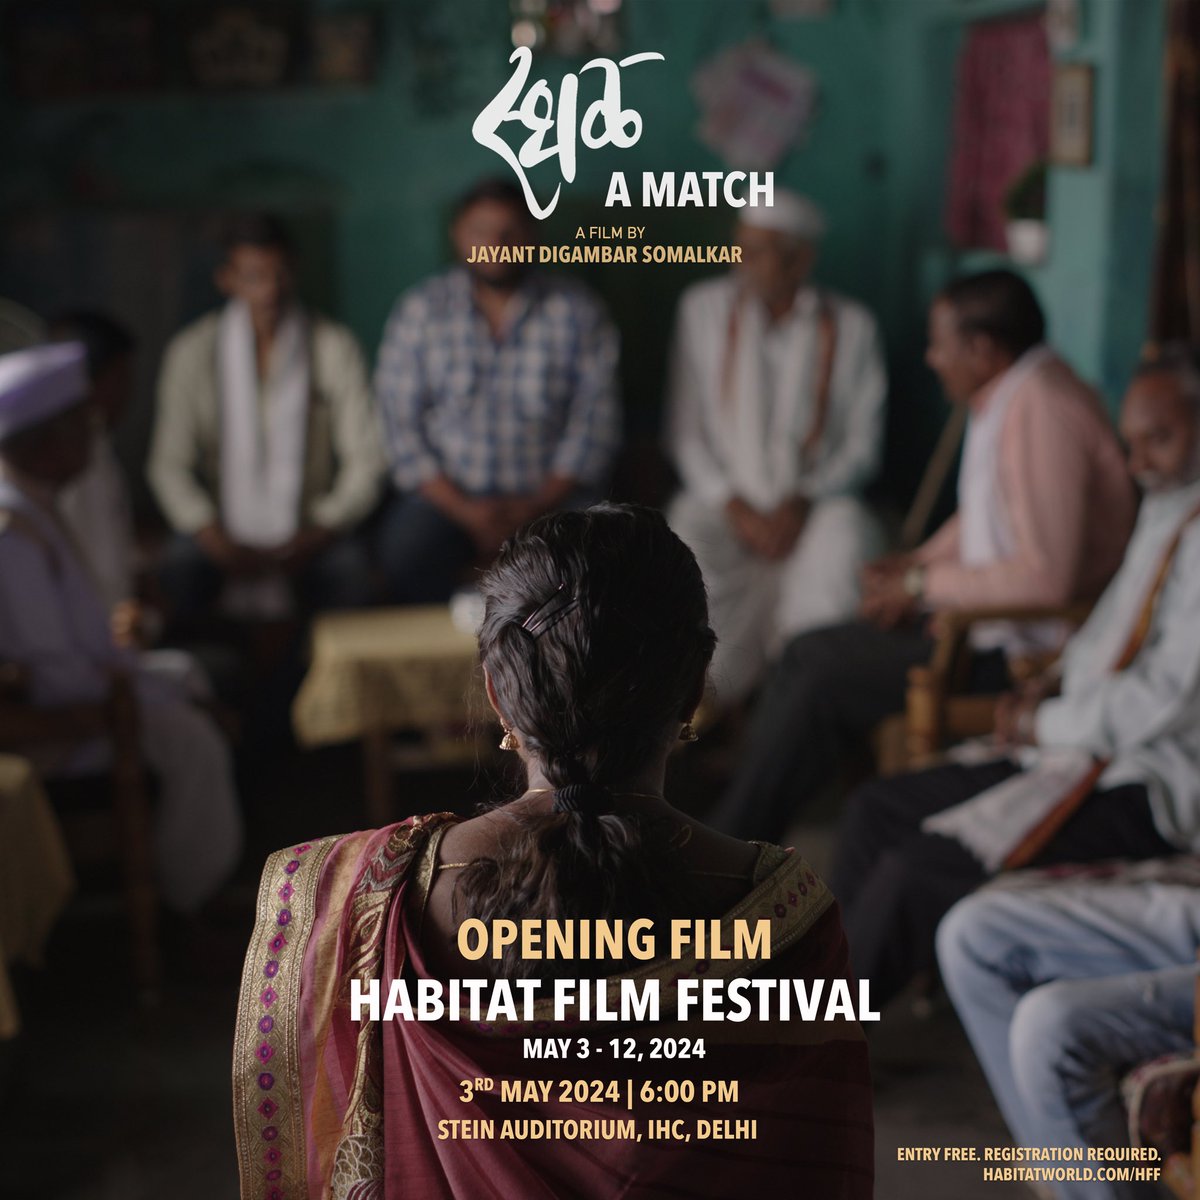 Sthal (A Match) will be the ‘Opening Film’ at the Habitat Film Festival 2024, Delhi. @habitatworld 
3rd May 2024 | 6 PM | Stein Auditorium, IHC  
Entry Free. Registration Required.  
See you there ❤️ #Sthal #AMatch #HFF24 #HabitatFilmFestival @shefalibhushan @9_kg9